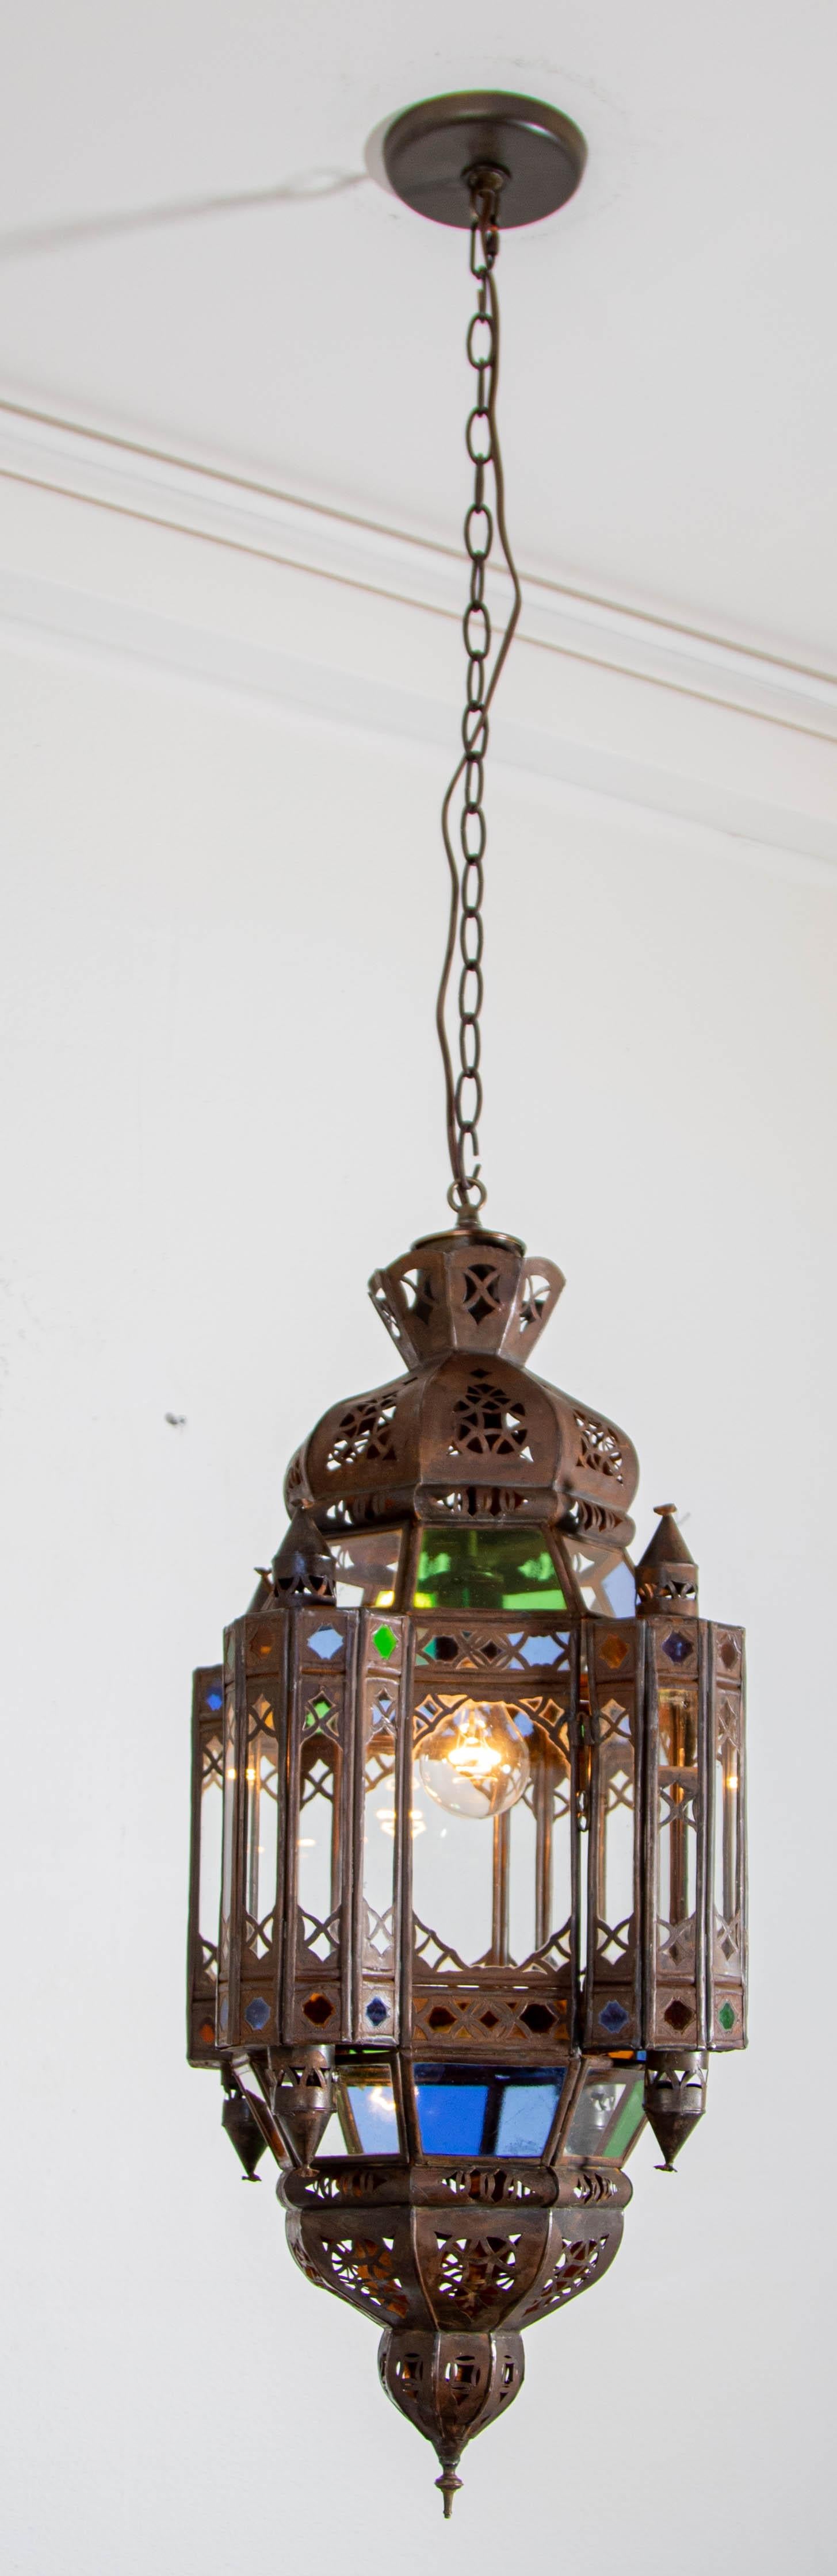 Vintage Moroccan Traditional Moorish Metal and Glass Lantern Ceiling Light For Sale 7